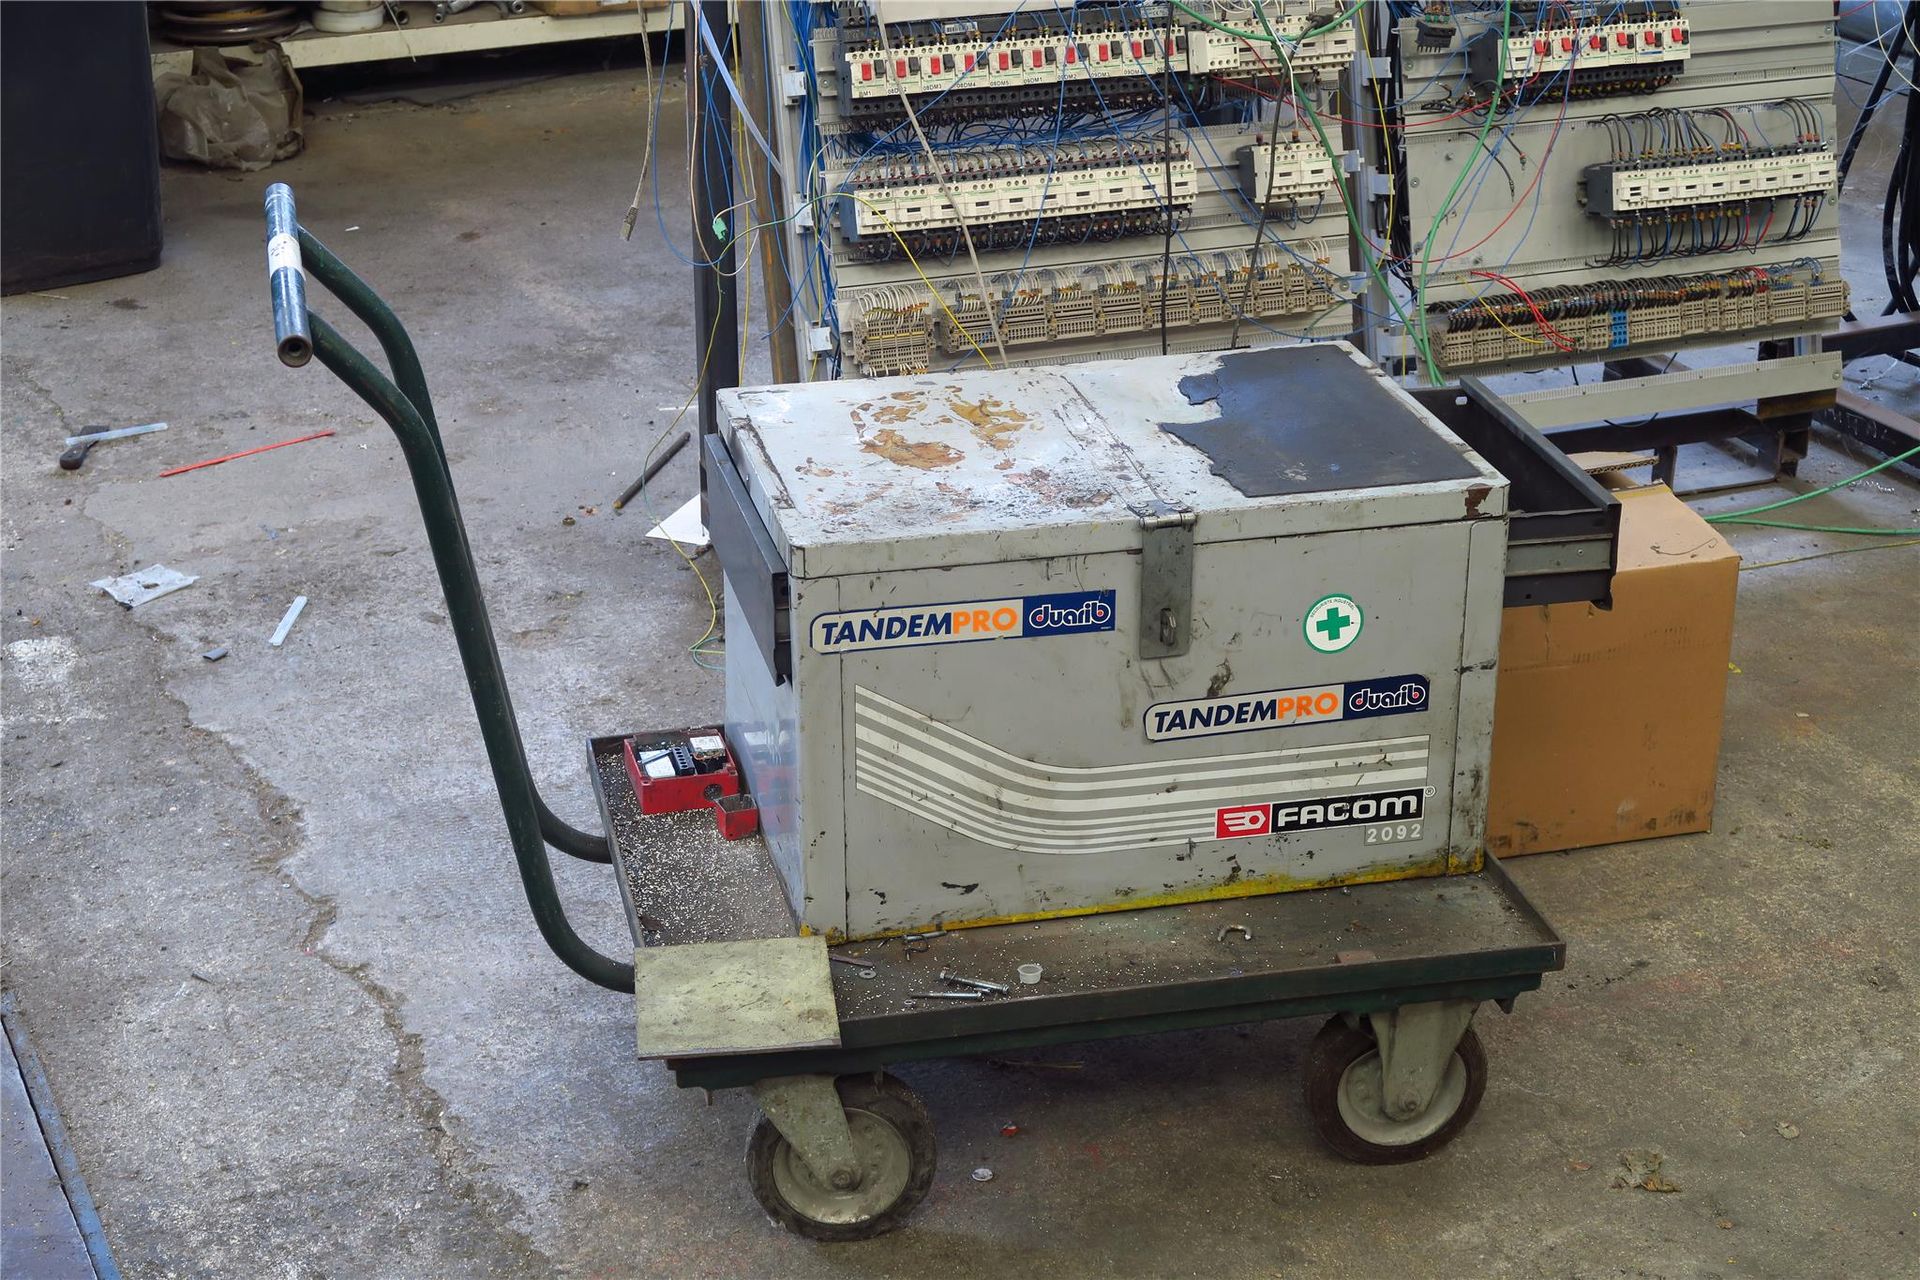 Null FACOM trolley with contents mounted on a mobile cart